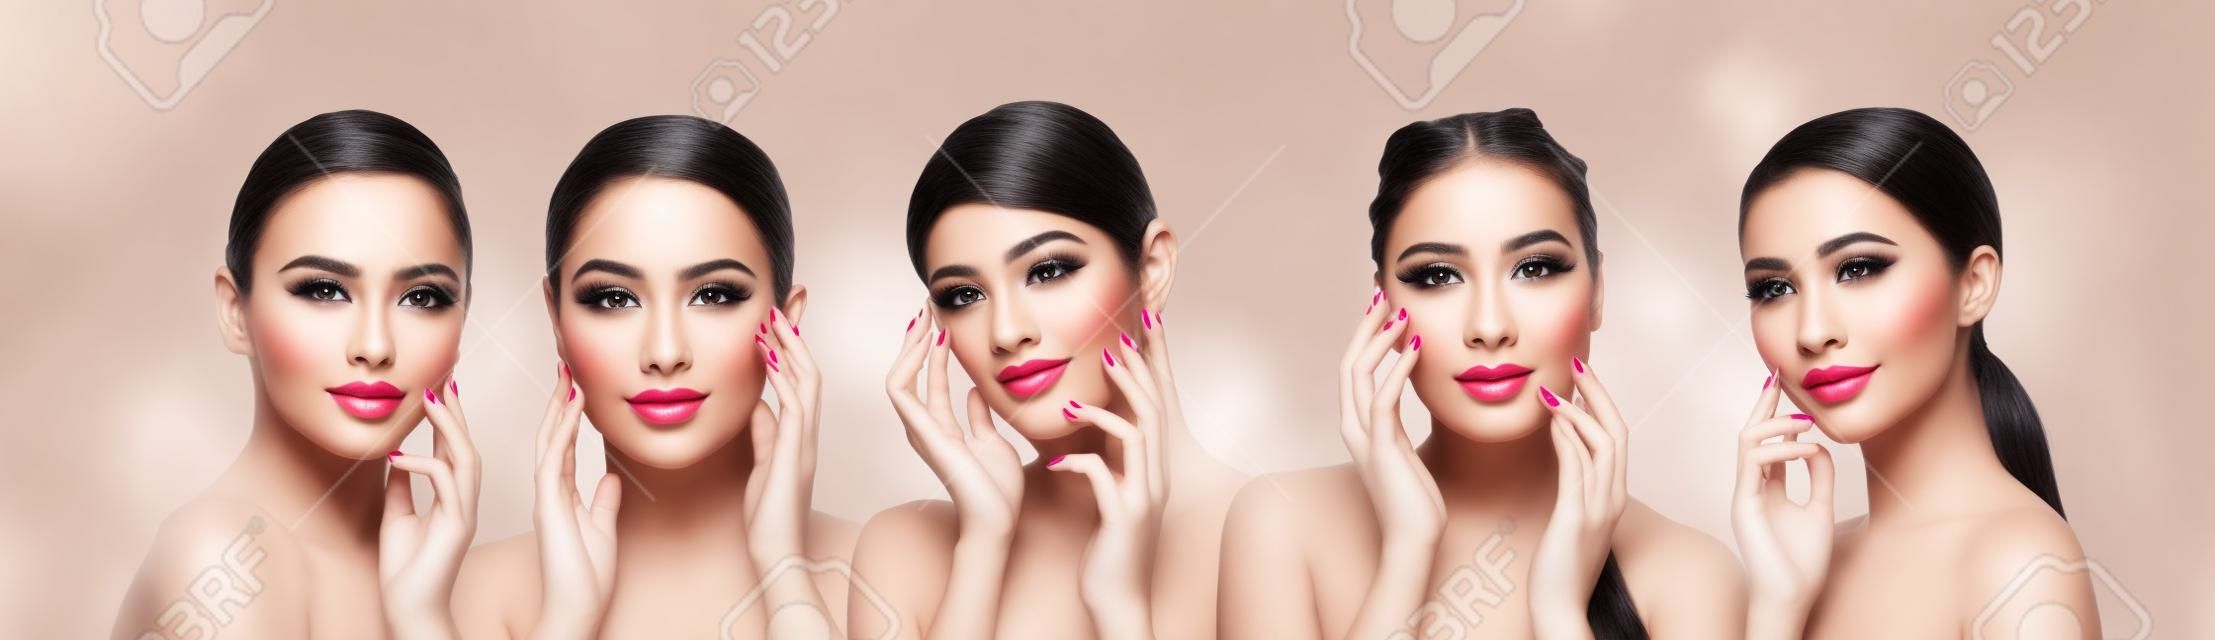 Collage. Multi-ethnic beauty. Different ethnicity and beautiful young women isolated on white background. Flyer for ad. Concept of beauty, fashion, healthcare, skincare. Interracial and multiculturalism.